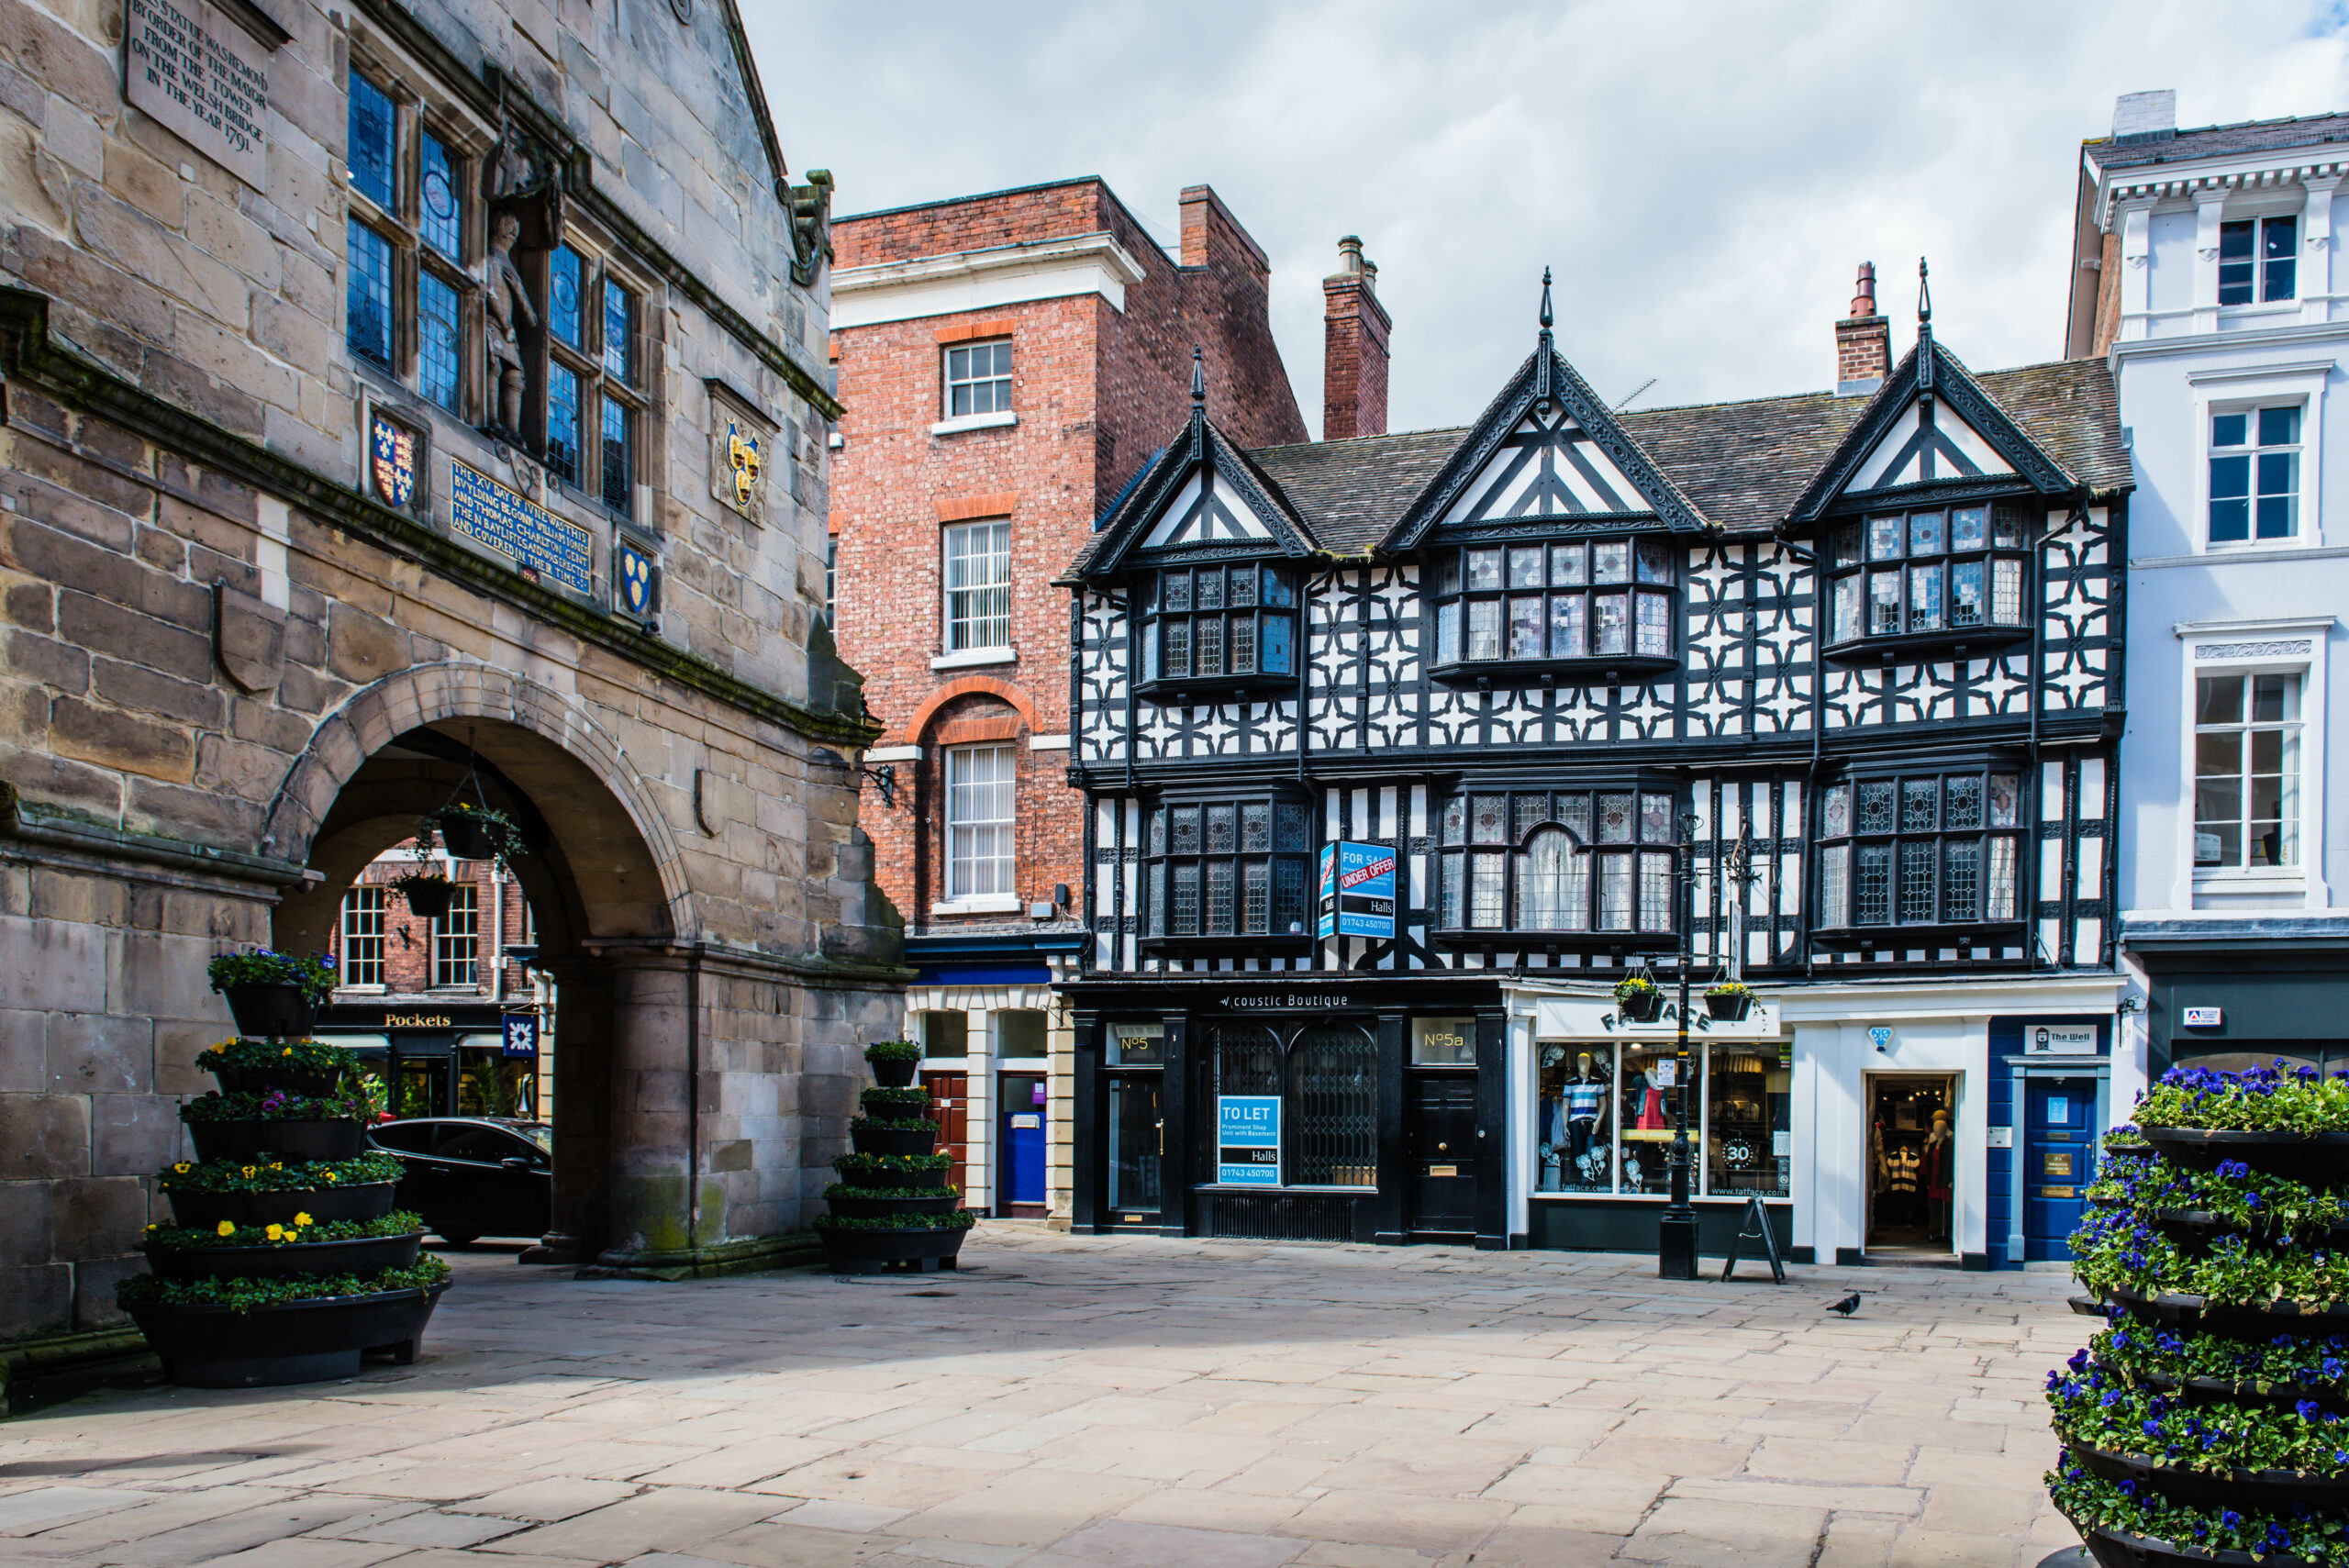 Shrewsbury wins best place to live accolade